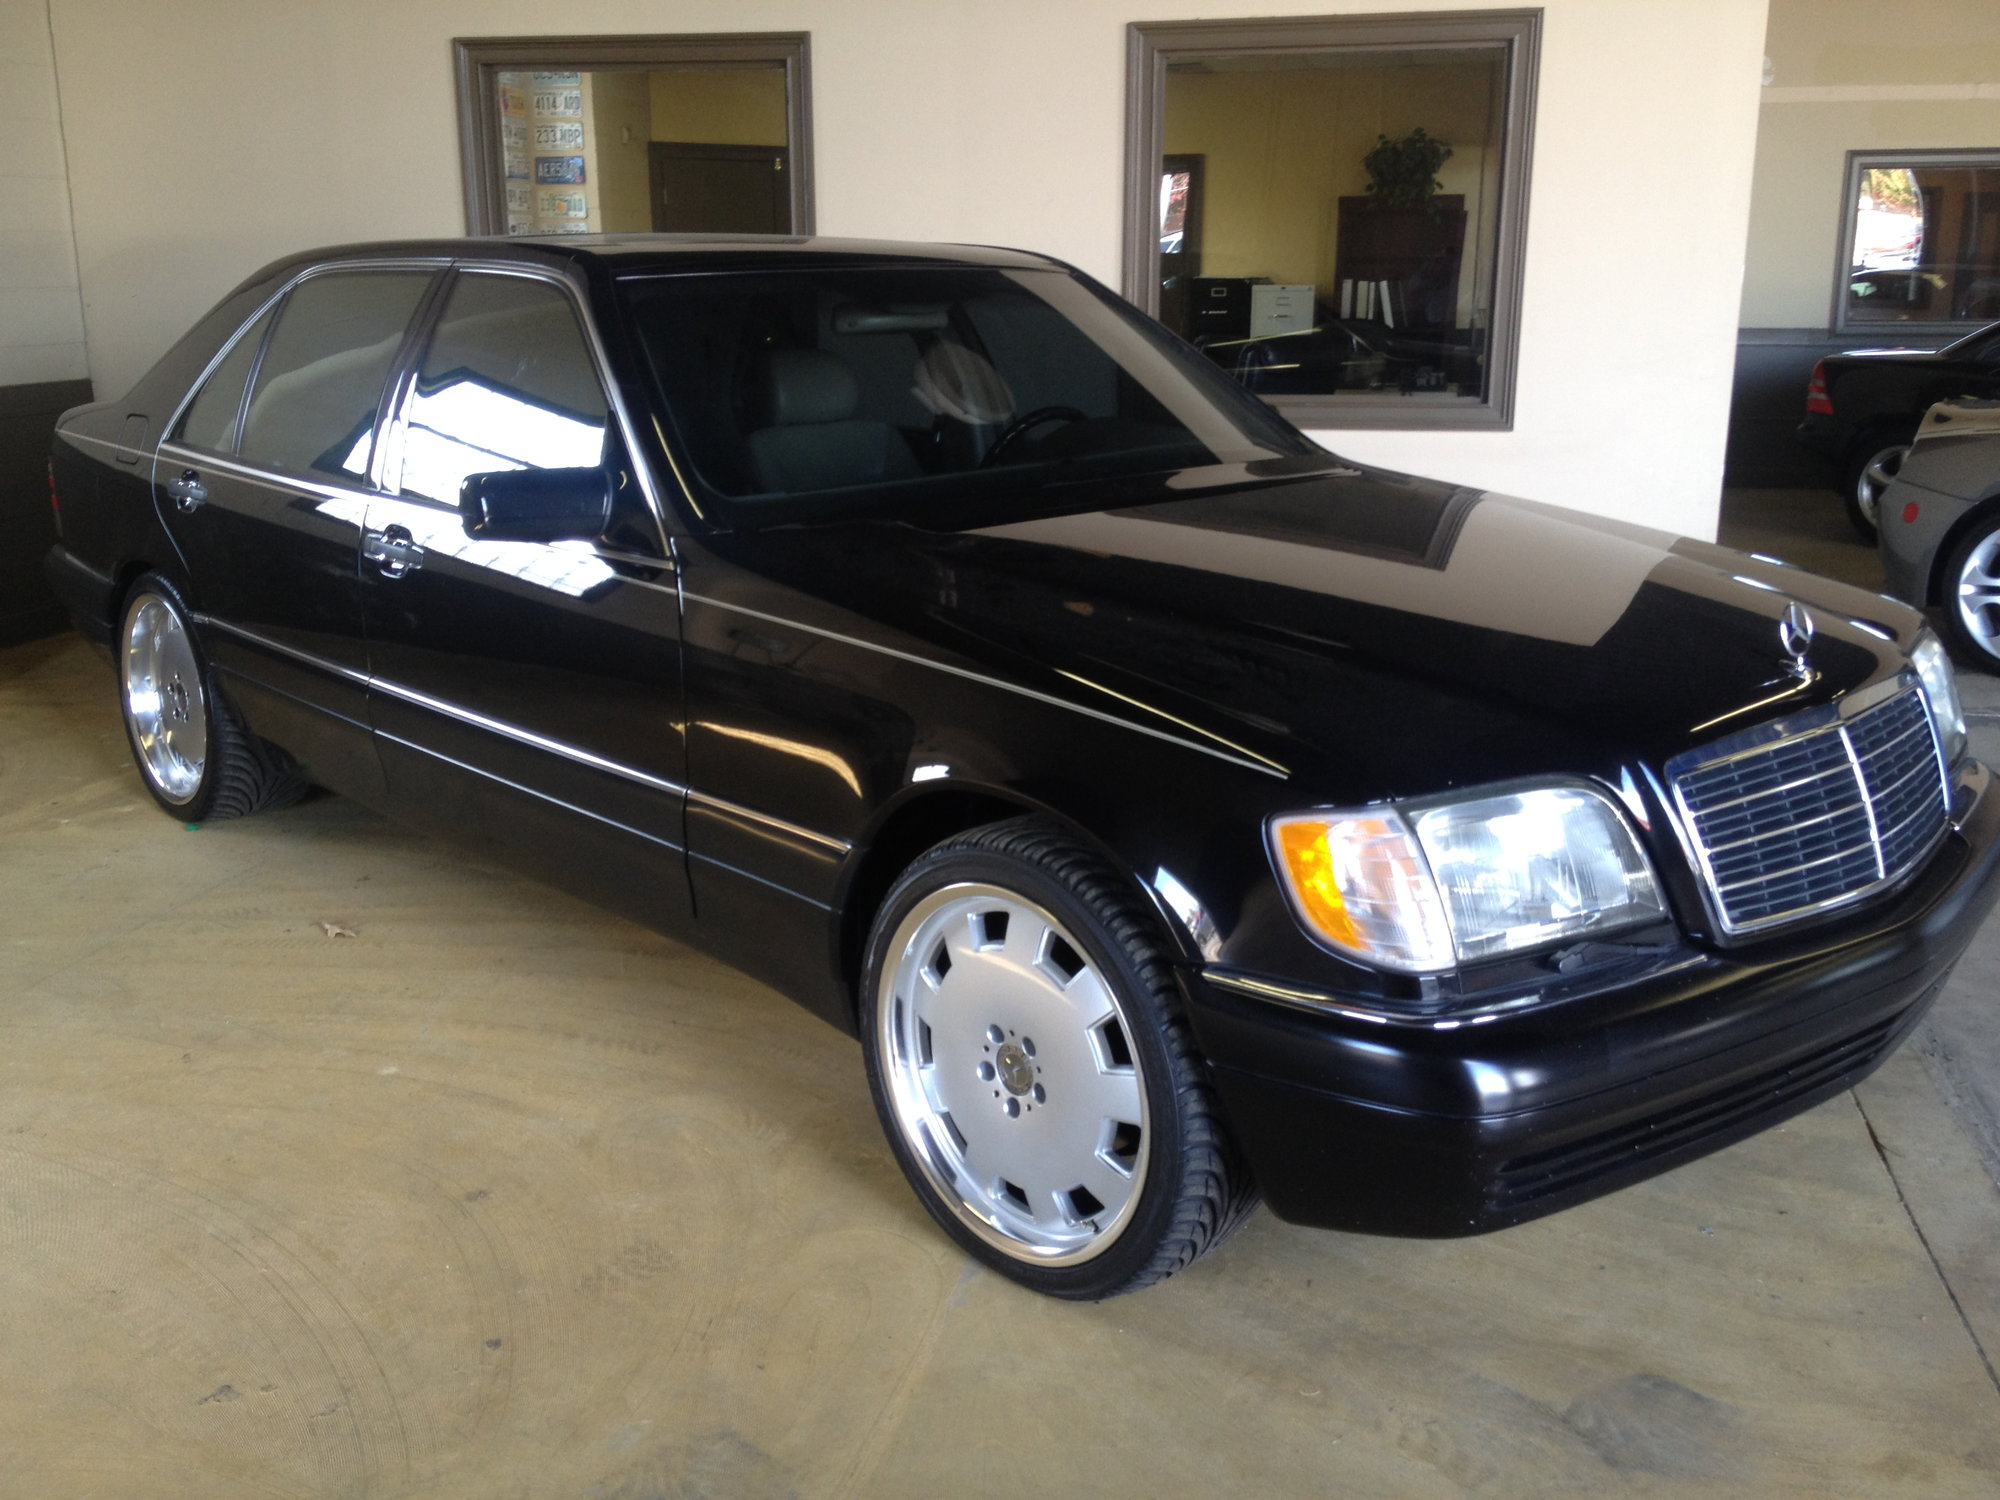 Selling my 1999 Mercedes S500 Grand Edition - MBWorld.org Forums